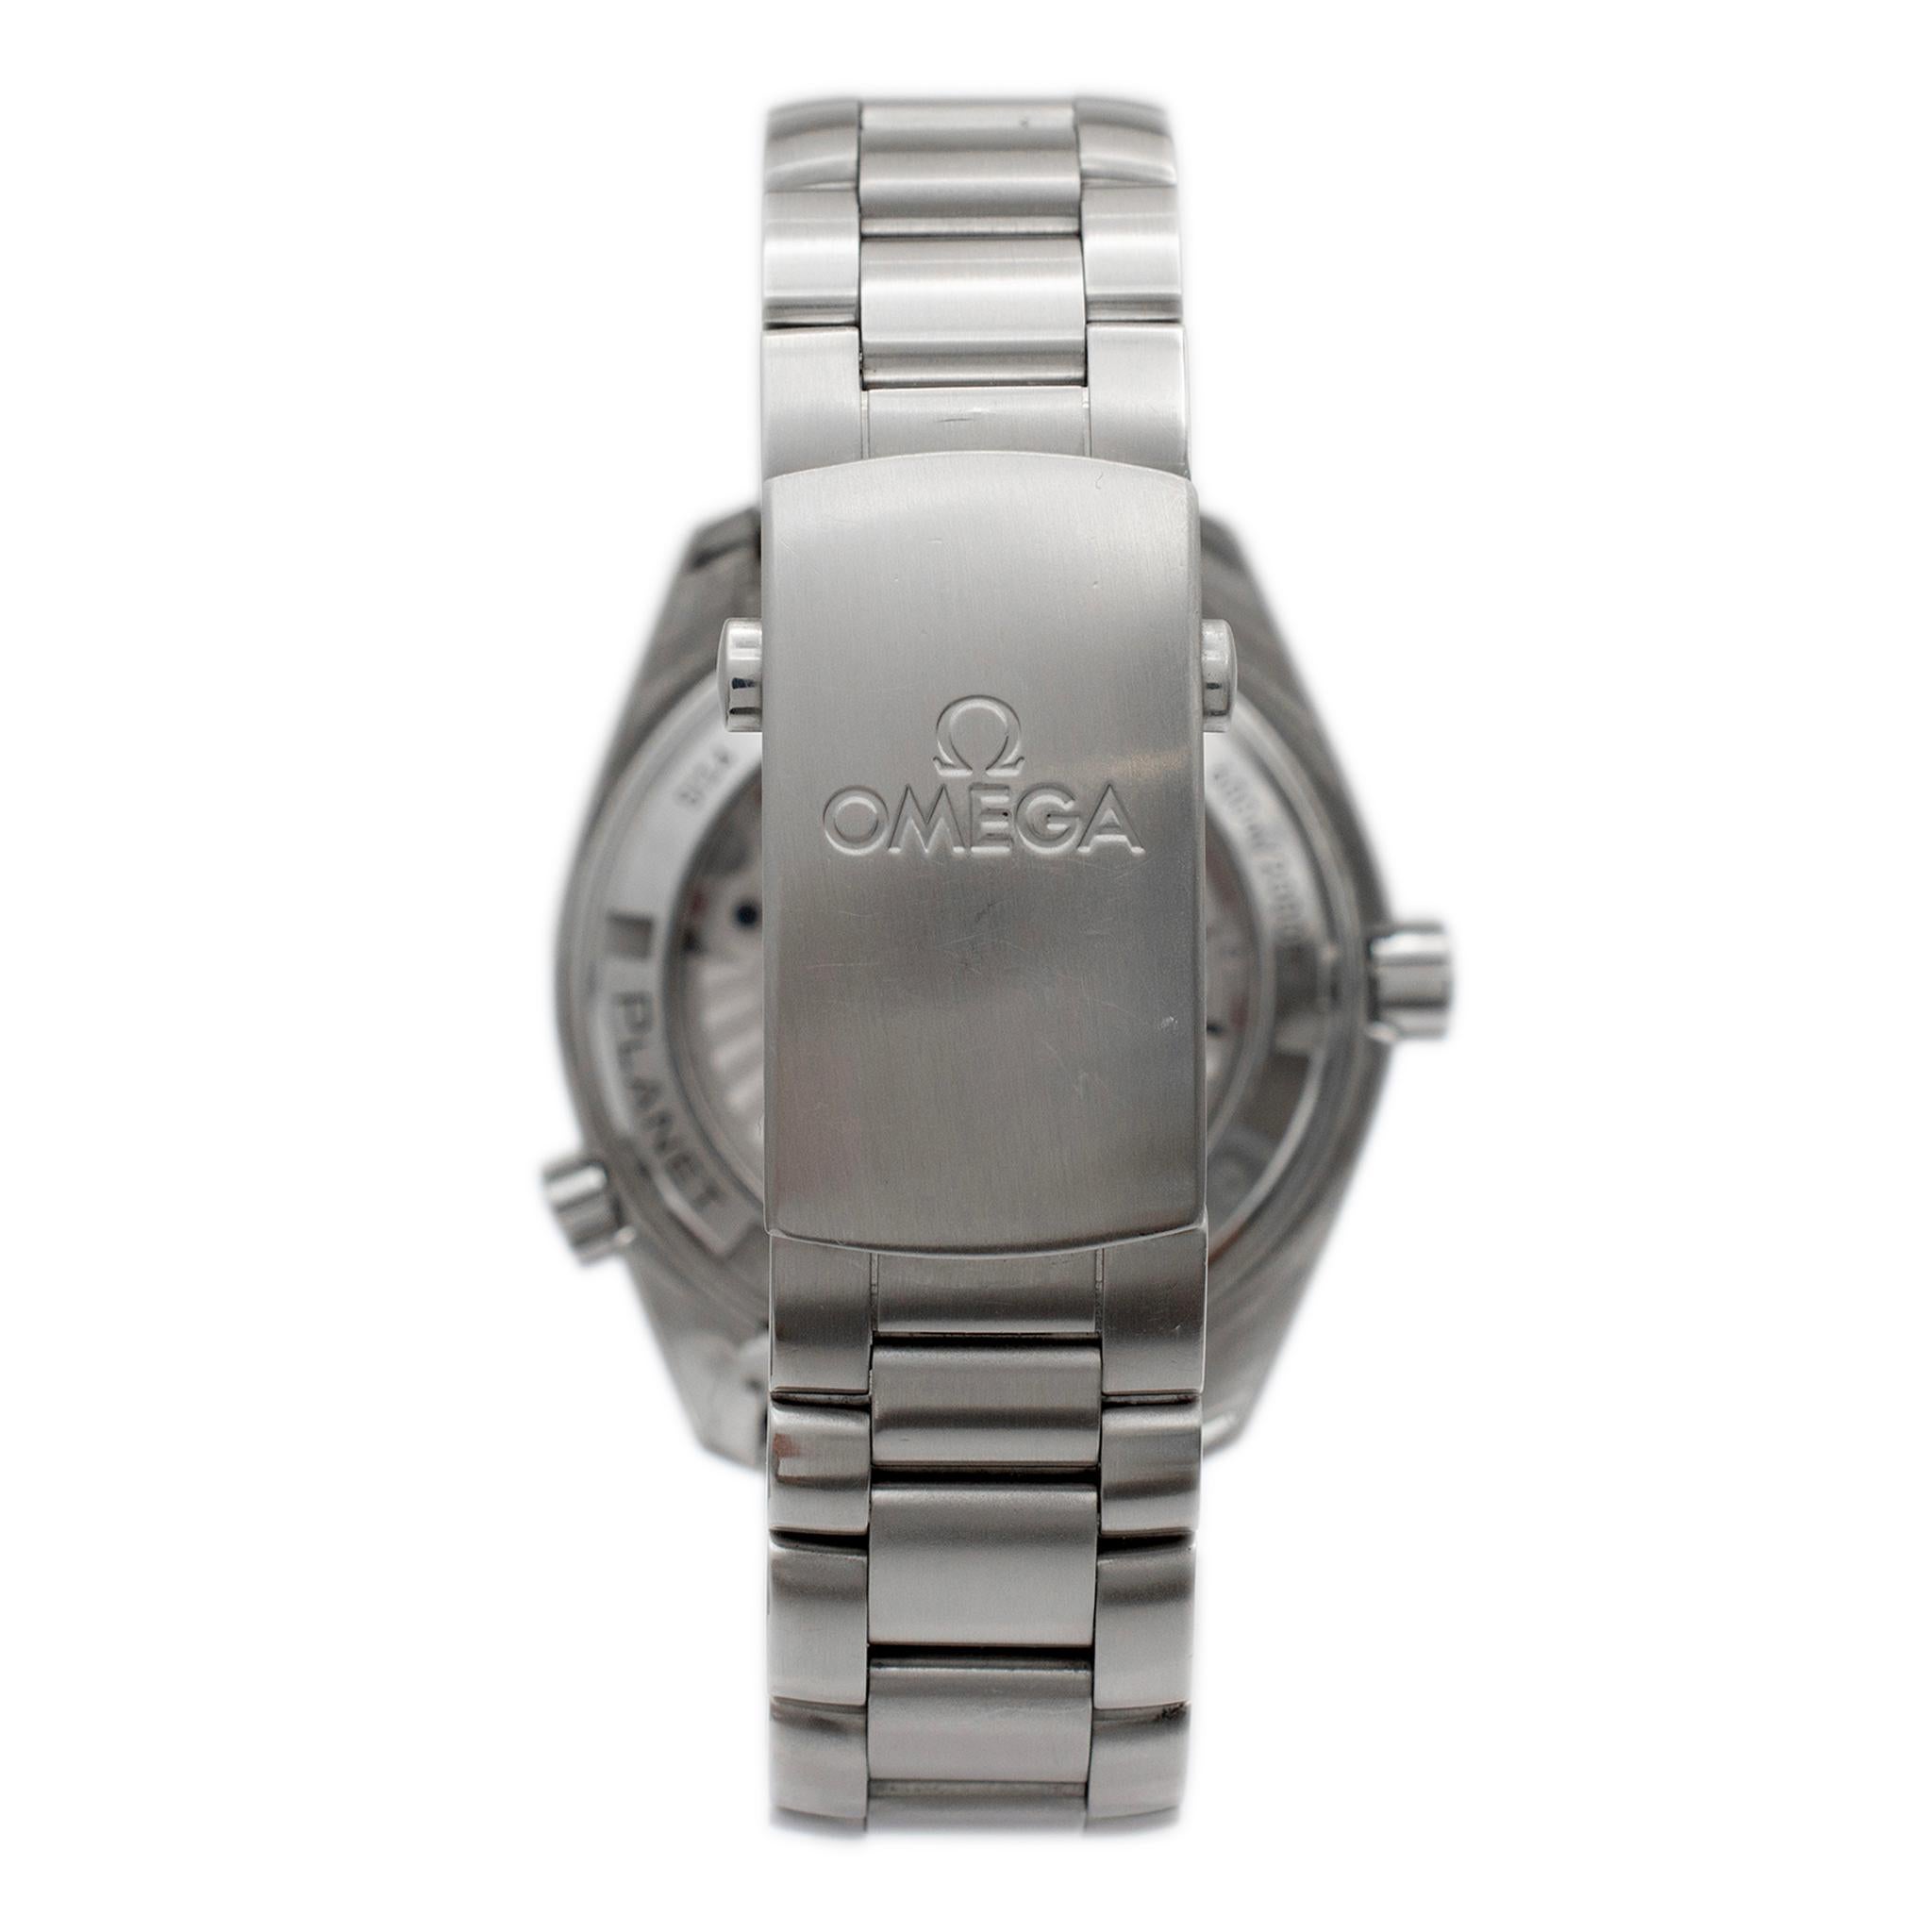 Omega Seamster Planet Ocean 232.30.42.21.01.001 42MM Stainless Steel Men’s Watch For Sale 1